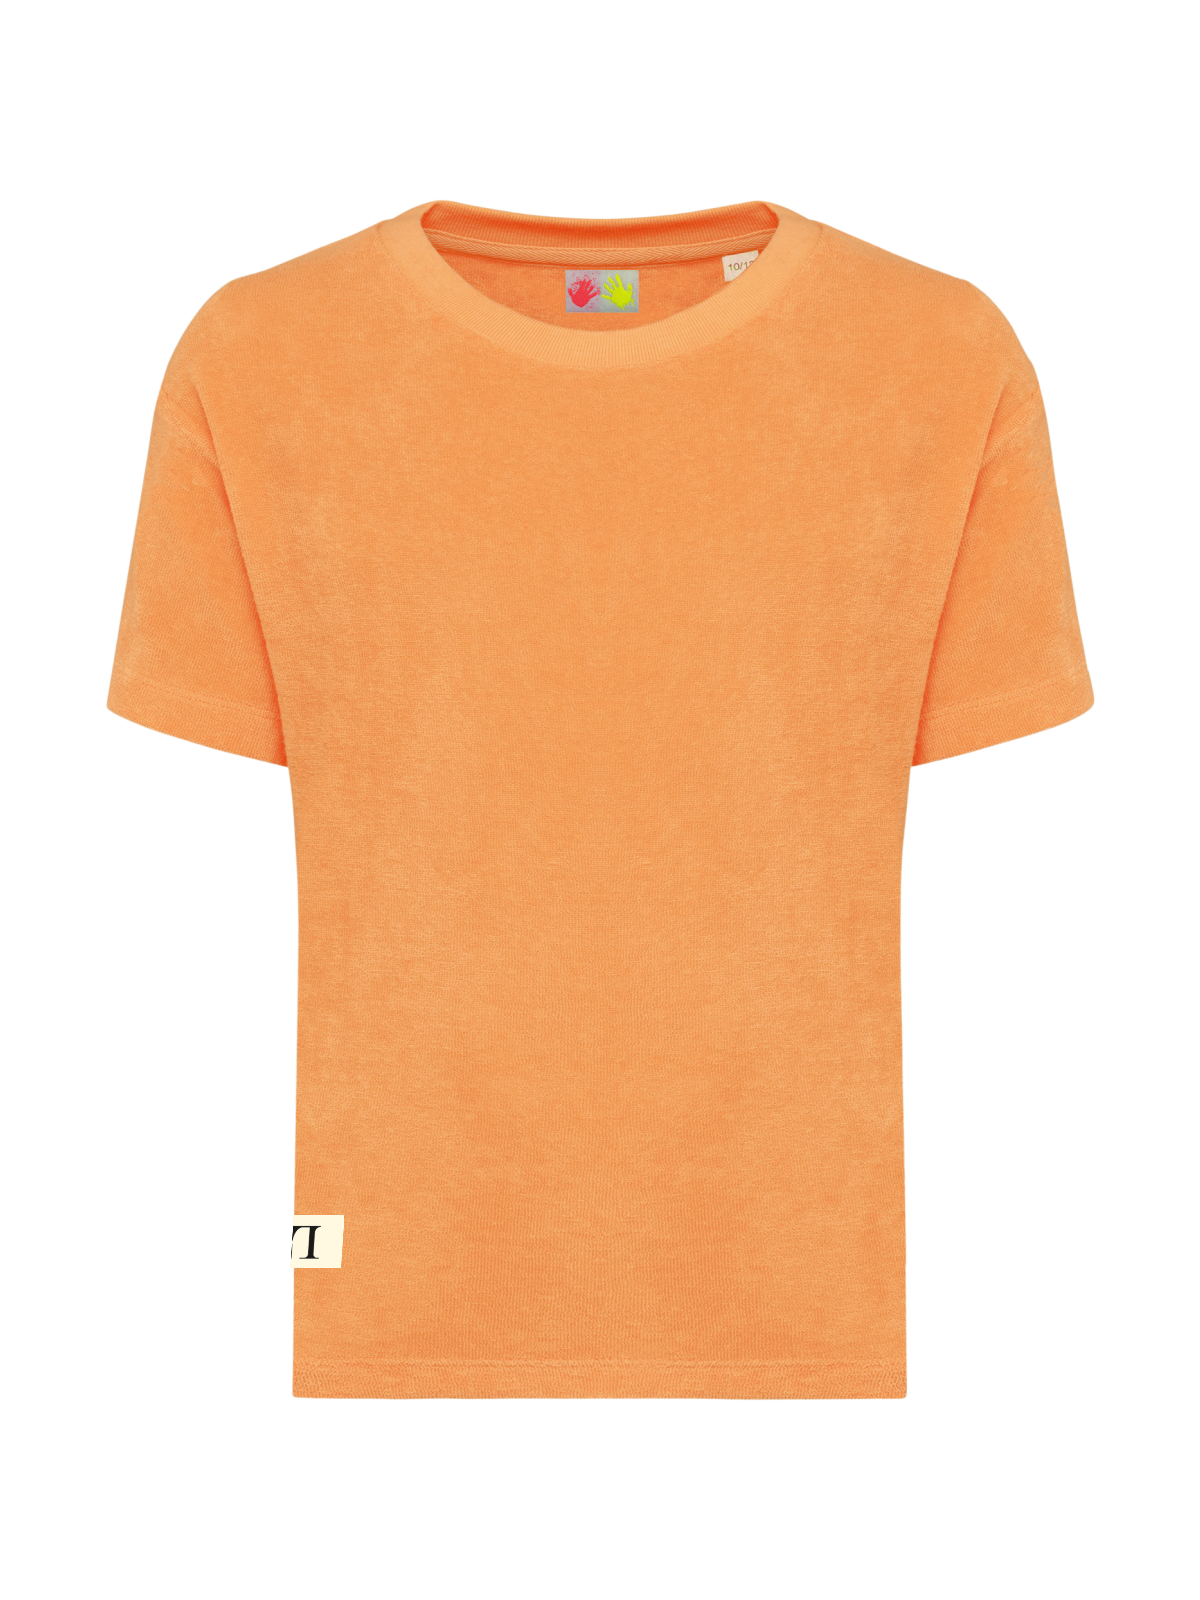 LL Girly Terry Towel-T-Shirt apricot